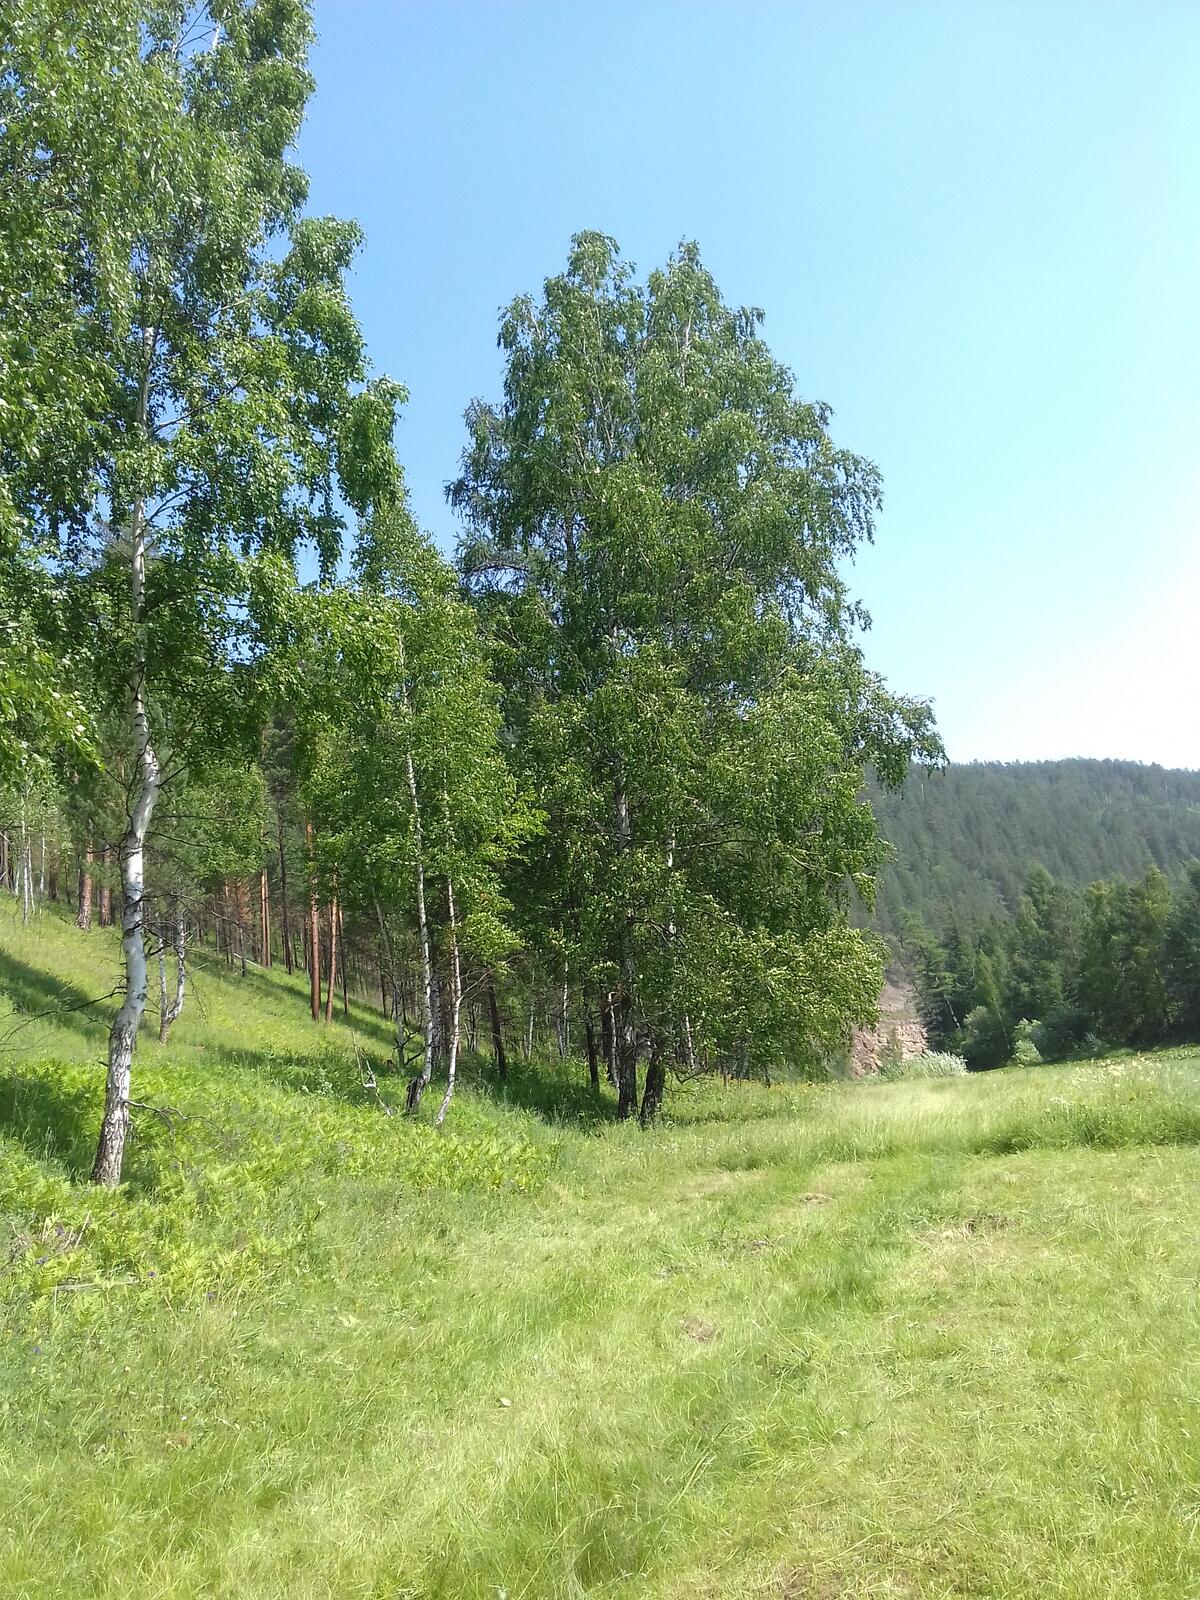 Birch trees by the field in Siberia